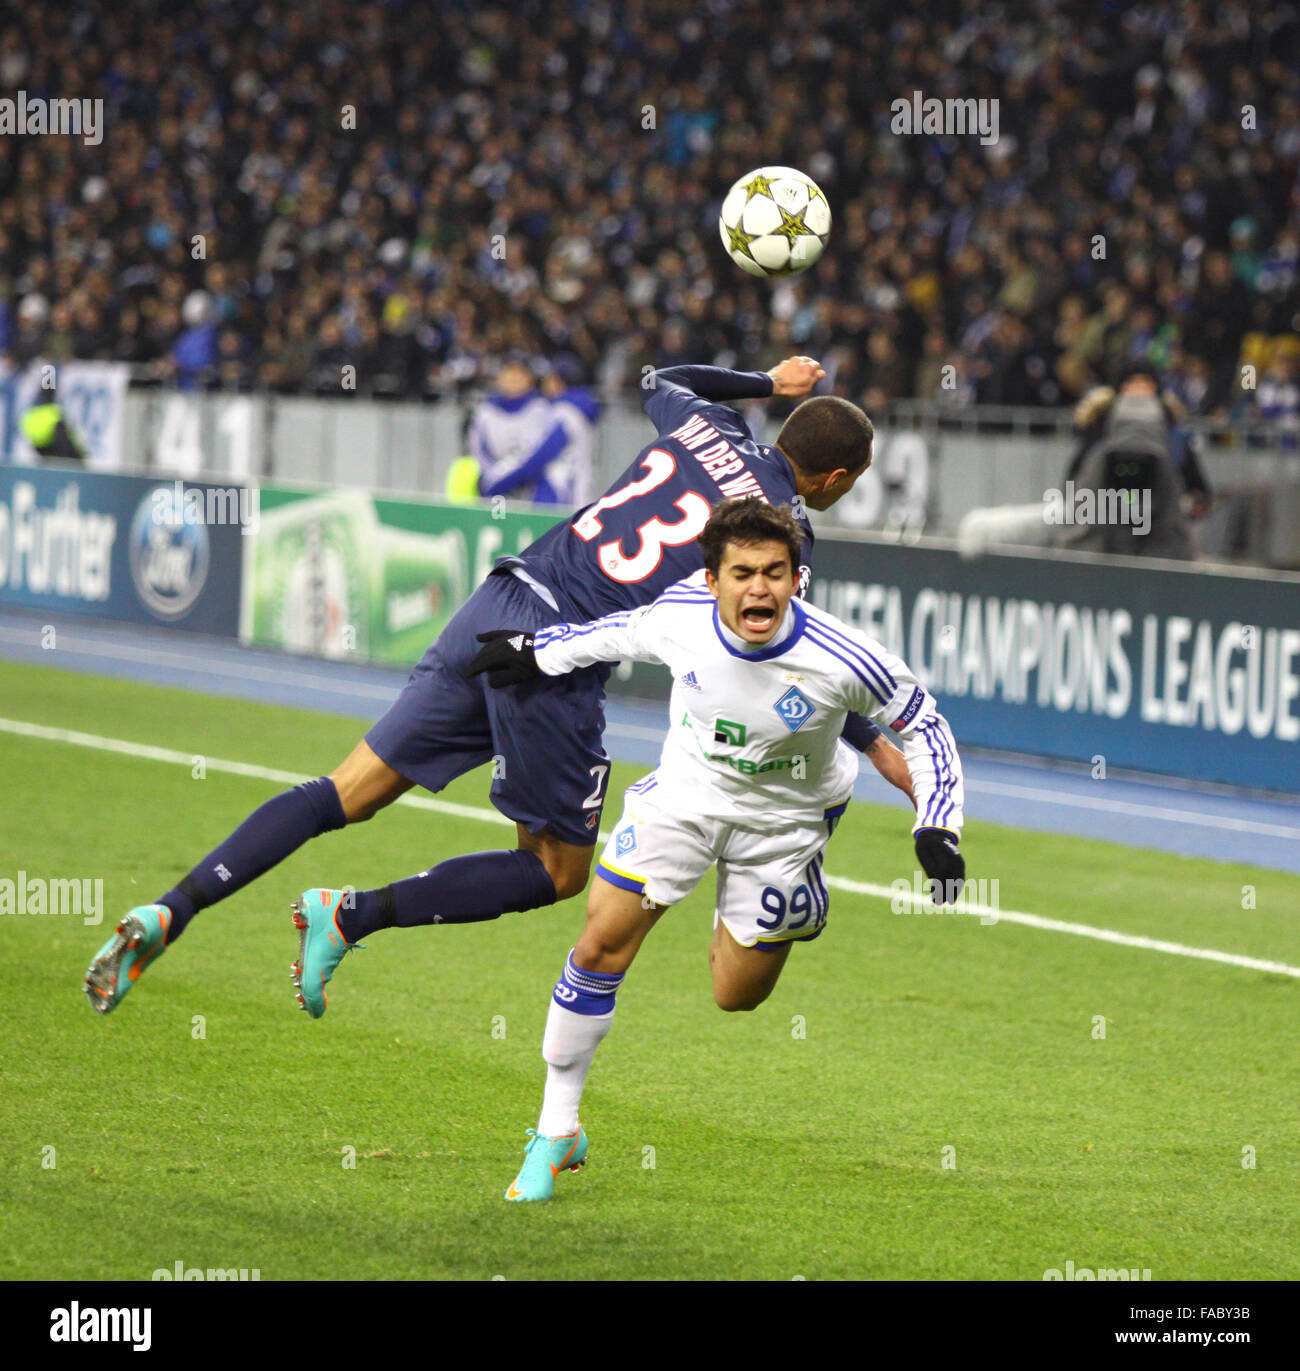 KYIV, UKRAINE - NOVEMBER 21, 2012: Gregory van der Wiel of FC Paris Saint-Germain (L, #23) fights for a ball with Dudu of FC Dynamo Kyiv (R, #99) during their UEFA Champions League game on November 21, 2012 in Kyiv, Ukraine Stock Photo